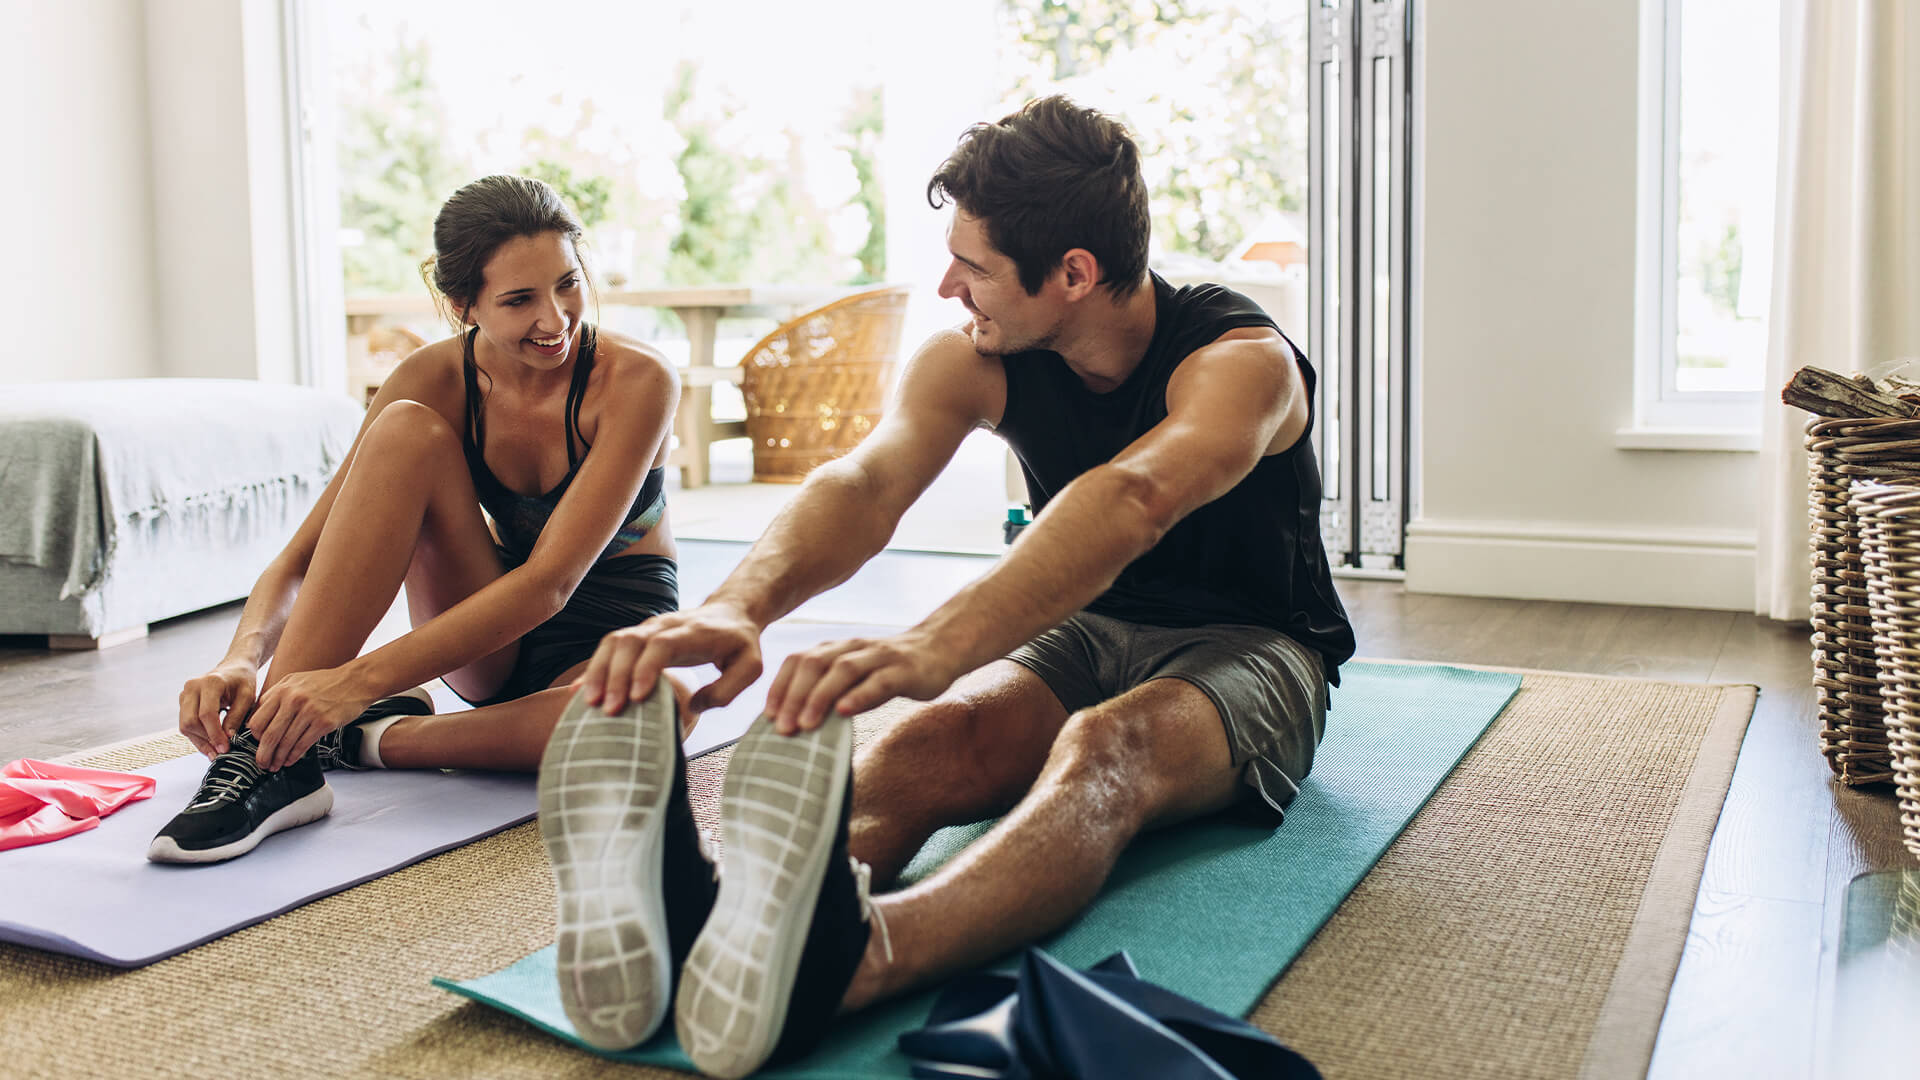 6 Tips for Exercising at Home